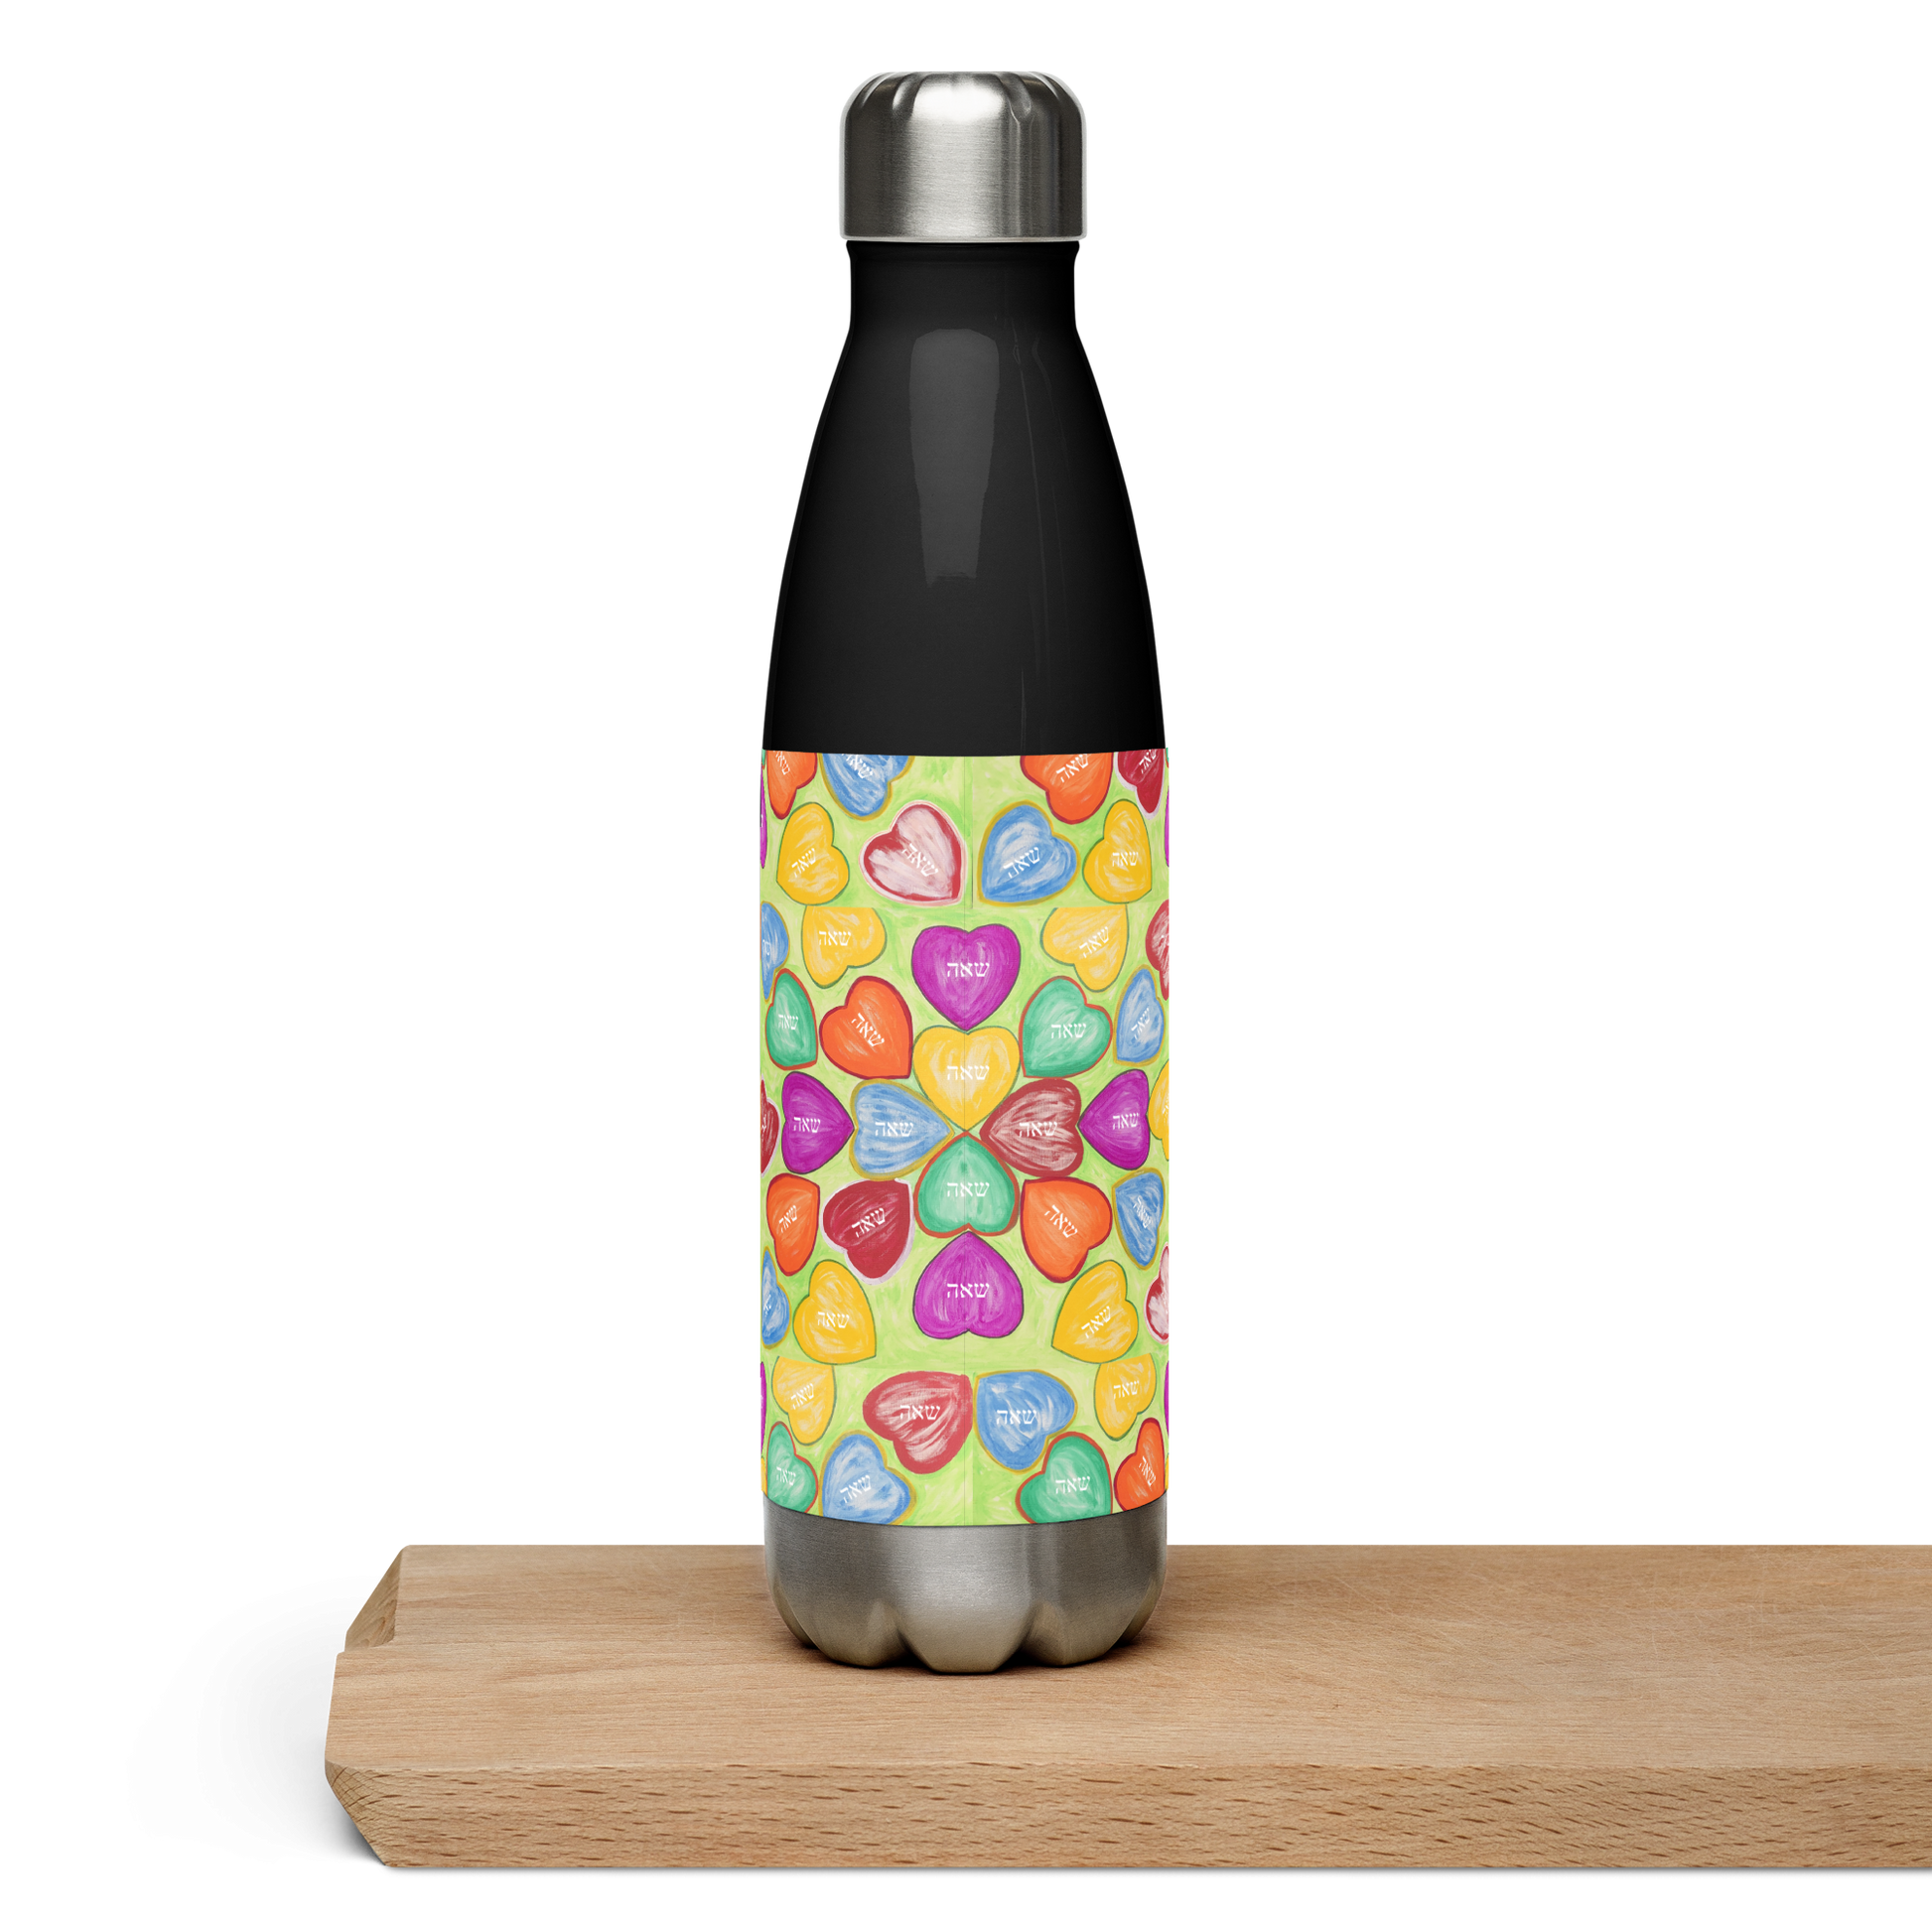  Stainless-Steel-Water-Bottle-17oz-Soulmate-(72-Names-of-God-ShinAleph-Yud)-14-137online.com